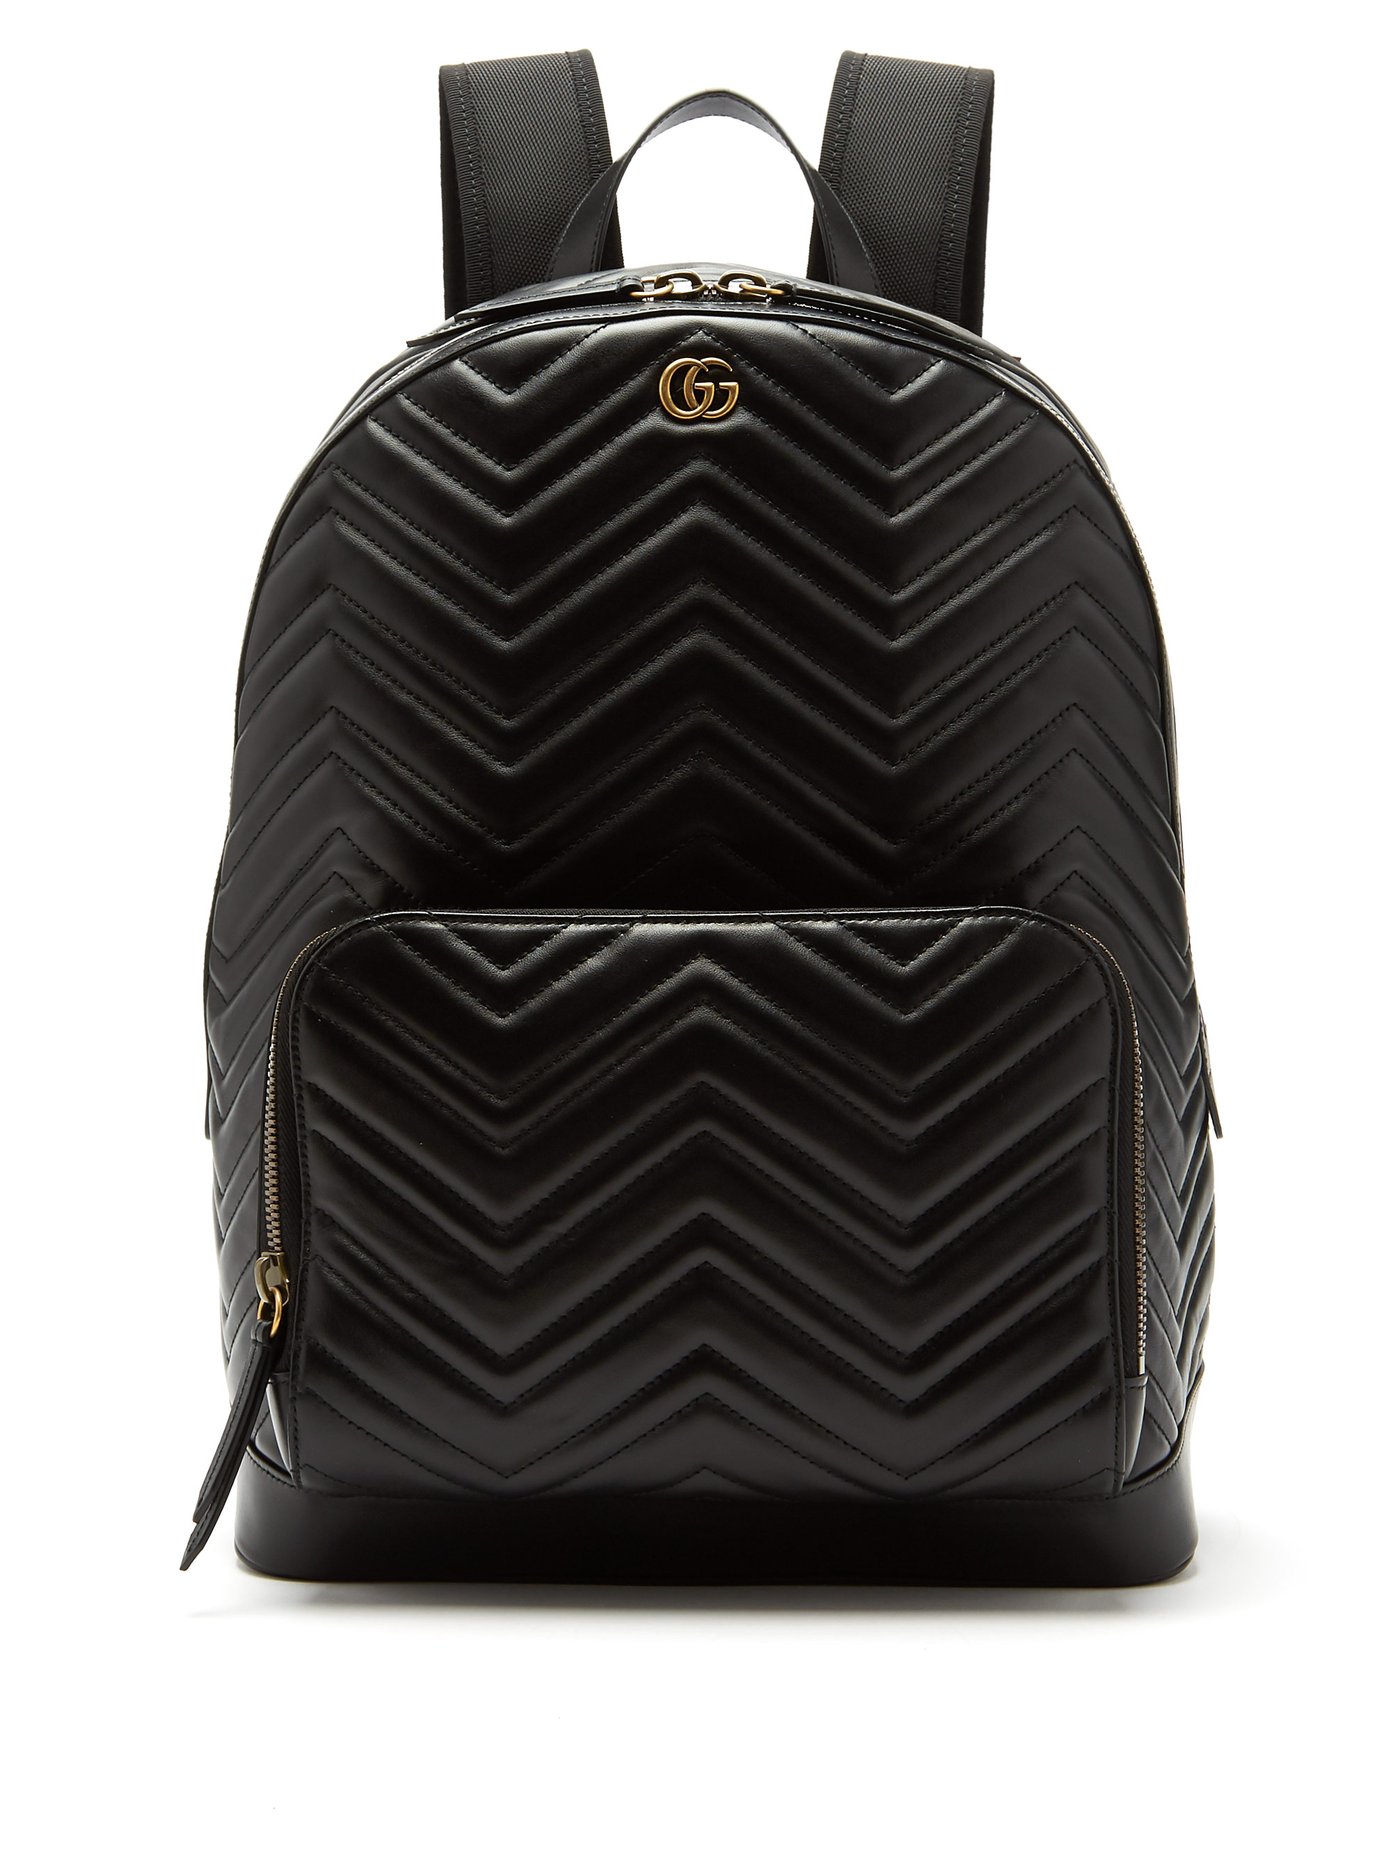 gg marmont leather backpack